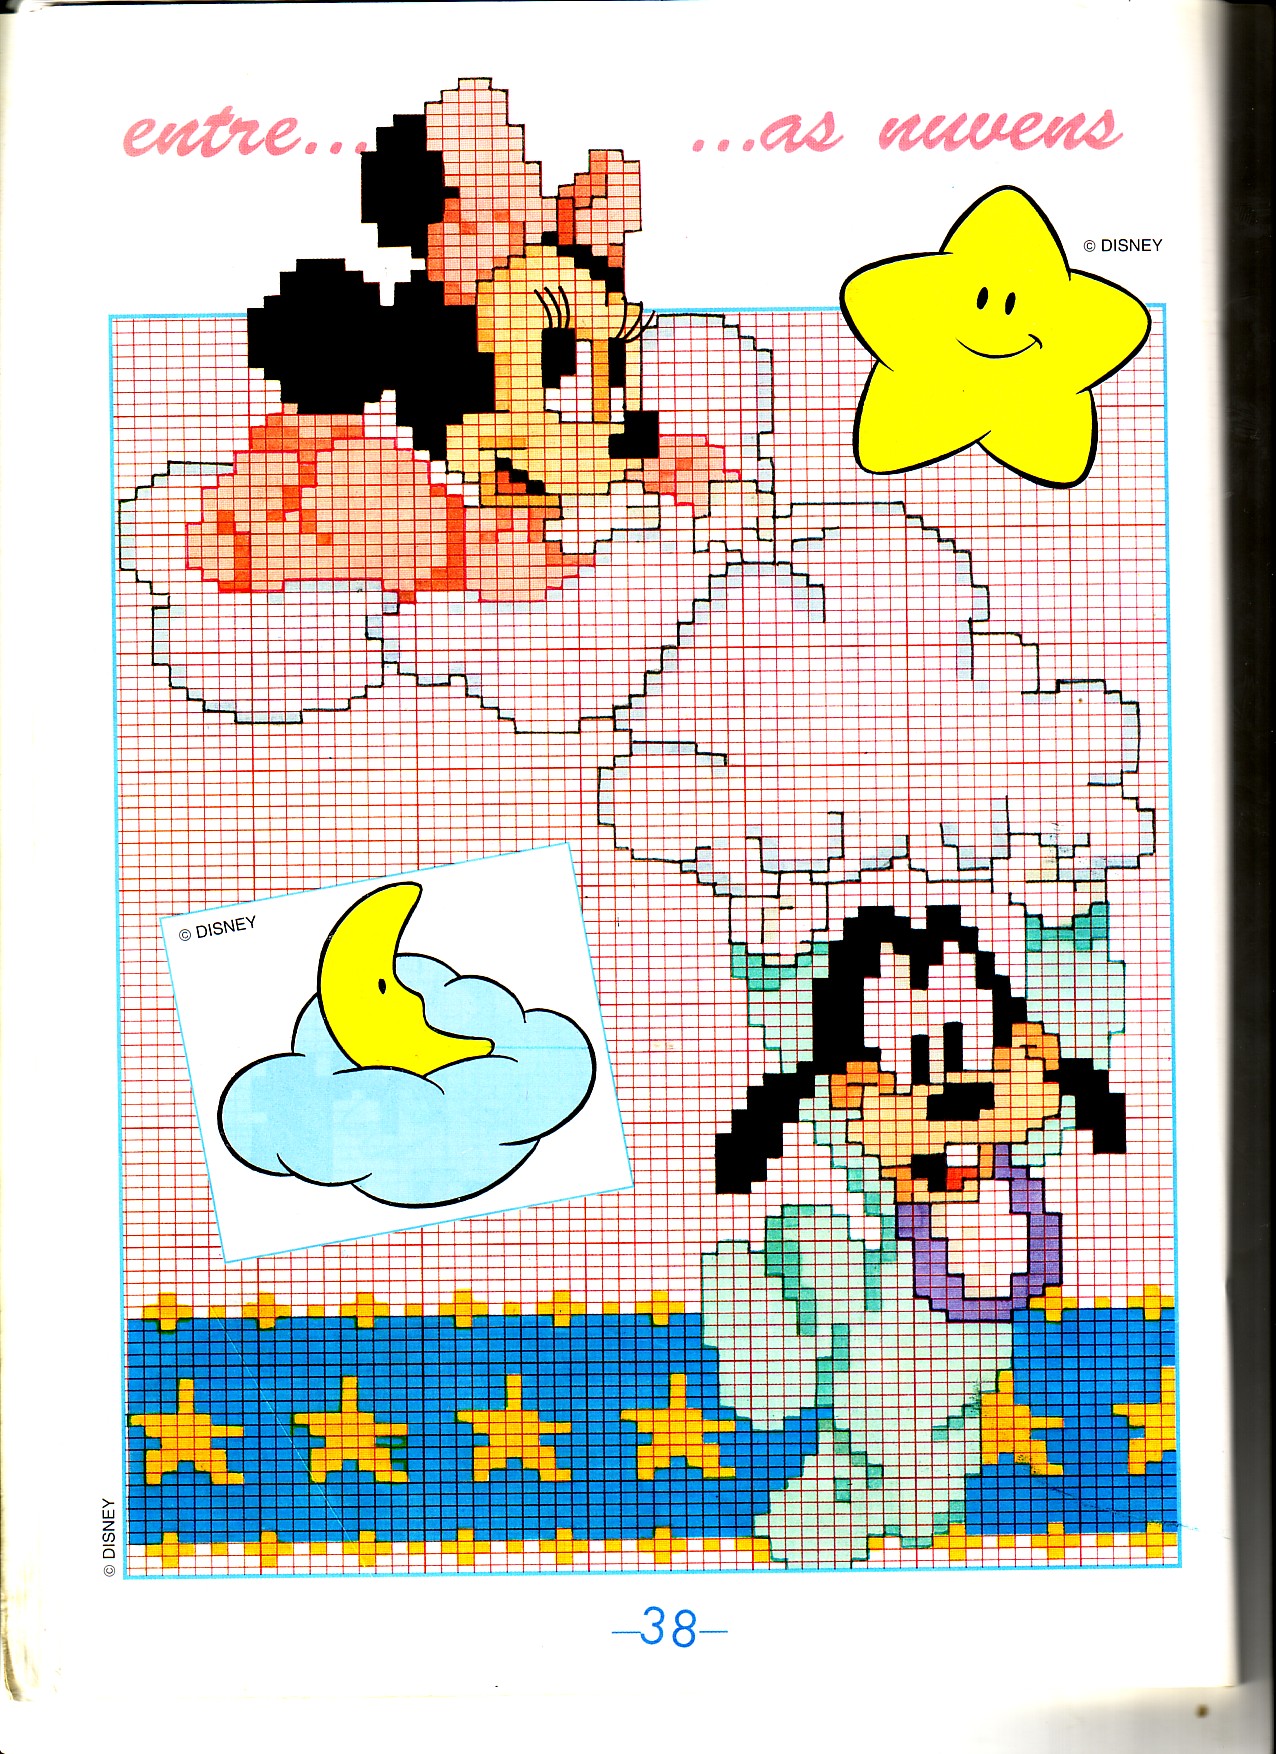 Baby Minnie and baby Pluto over the clouds